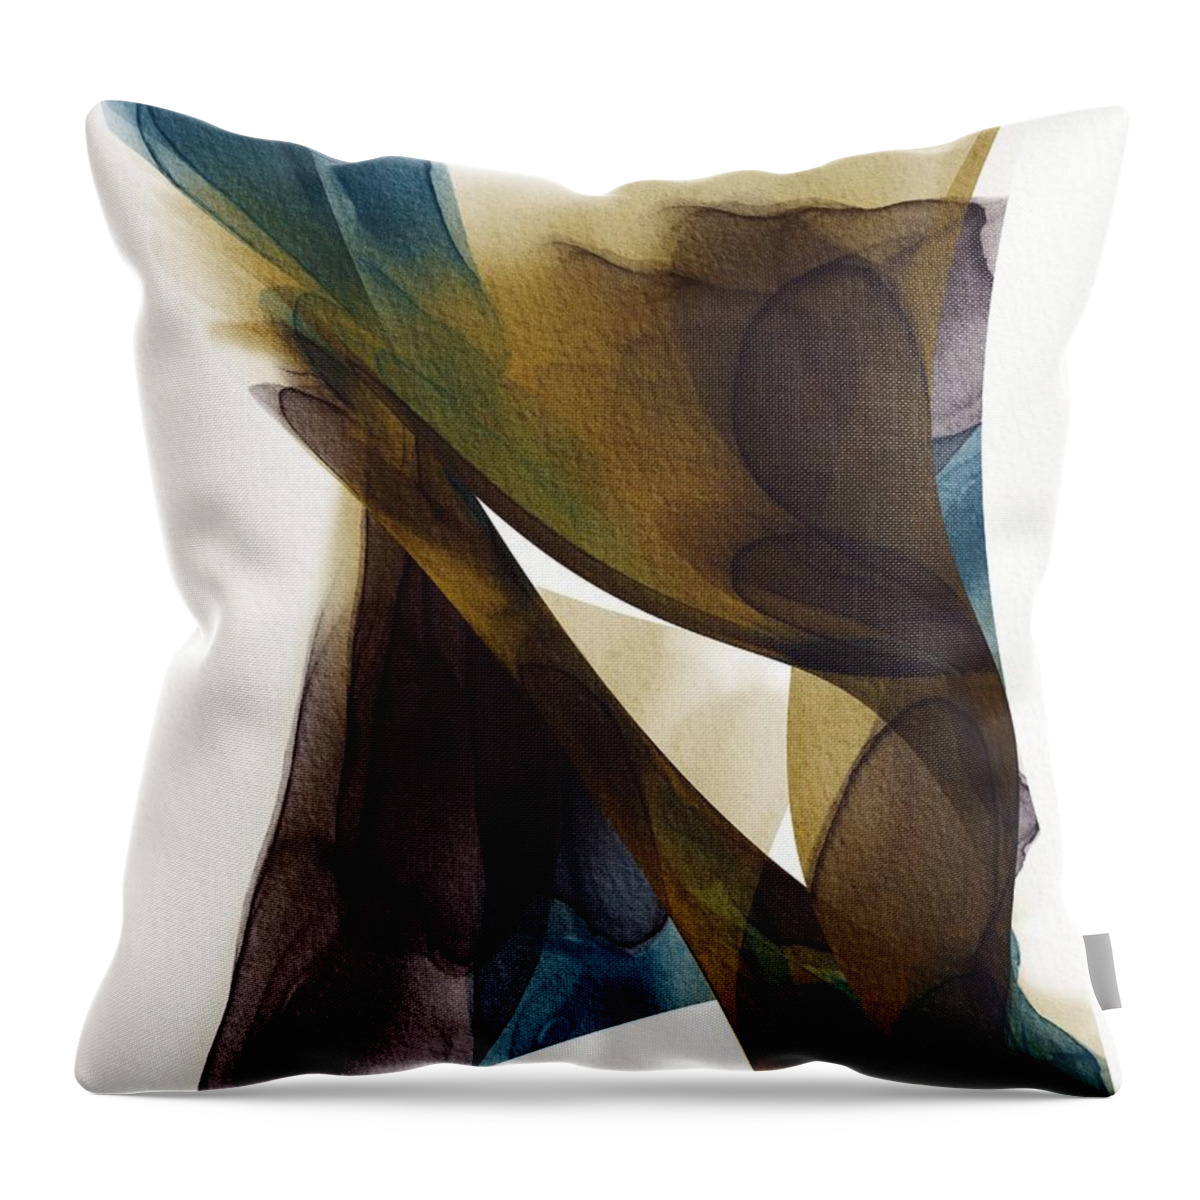 Sculptural Throw Pillow featuring the painting Number 1 Between Ink Abstract Teal Brown by Itsonlythemoon